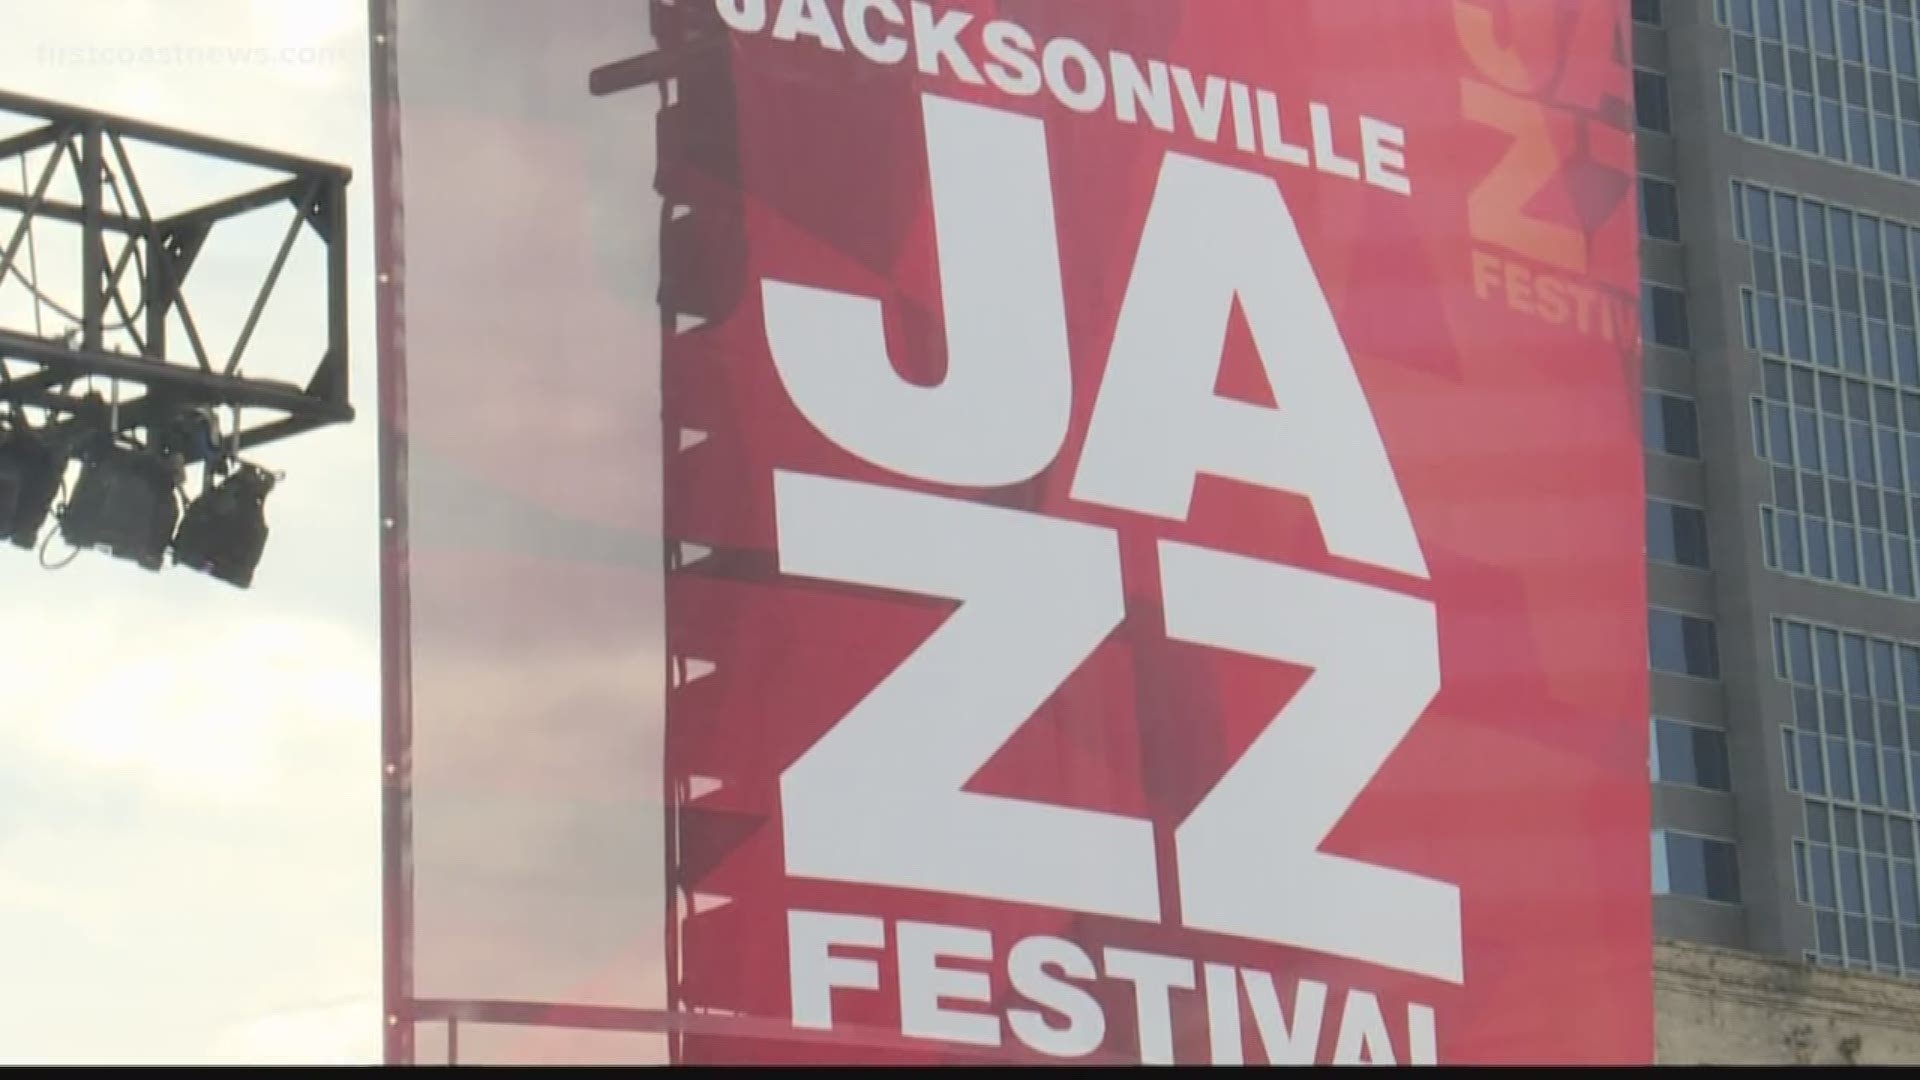 Organizers say the Jazz Festival is still happening despite the possibility of severe weather.